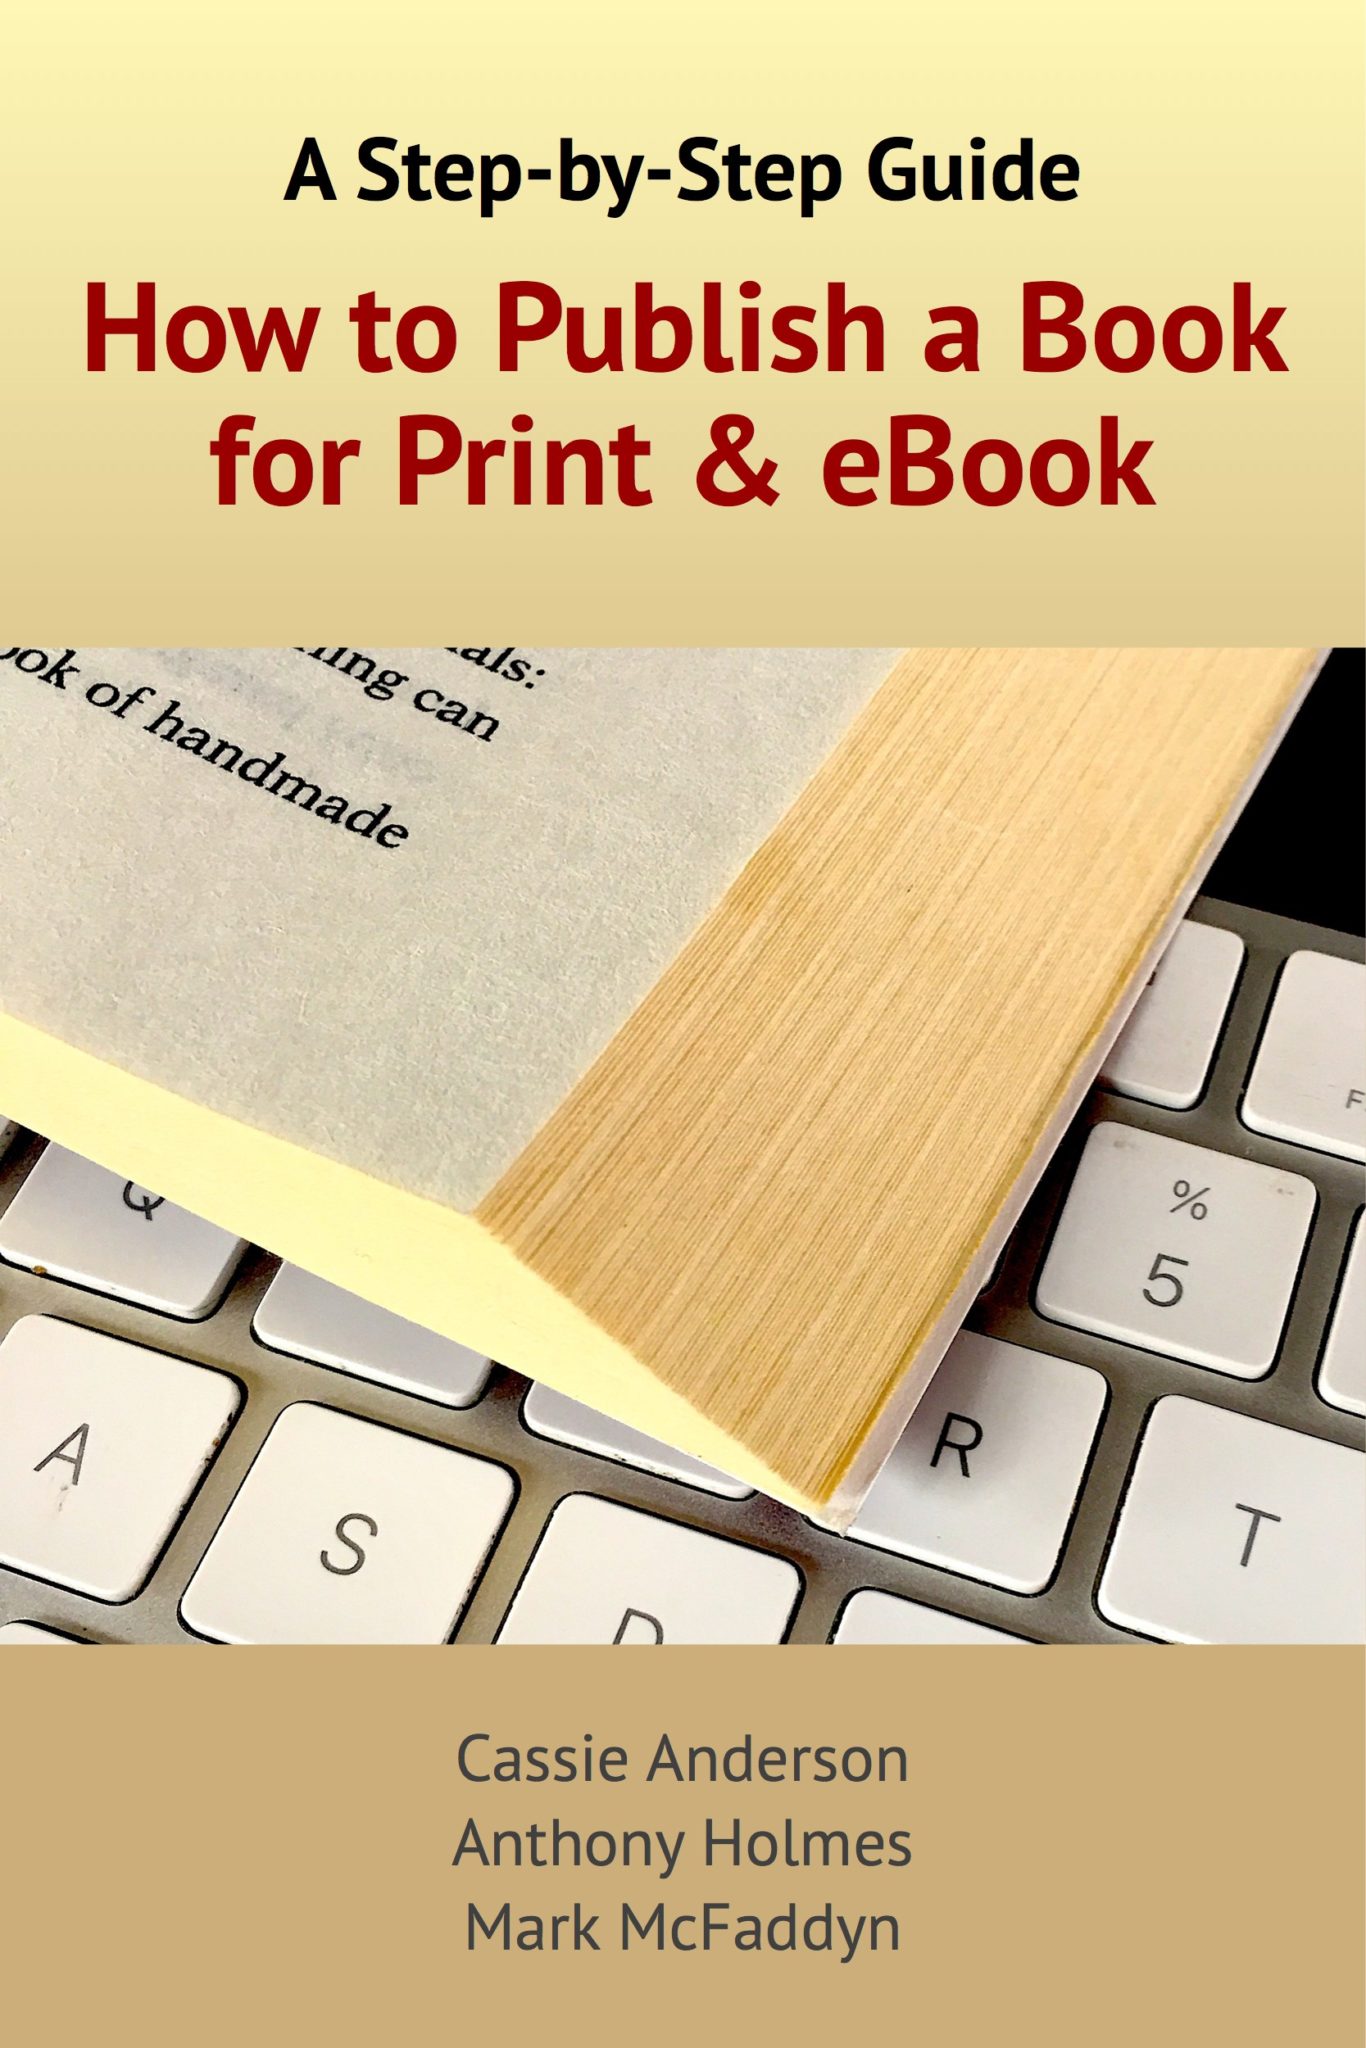 how-to-publish-a-book-for-print-ebook-a-step-by-step-guide-sulis